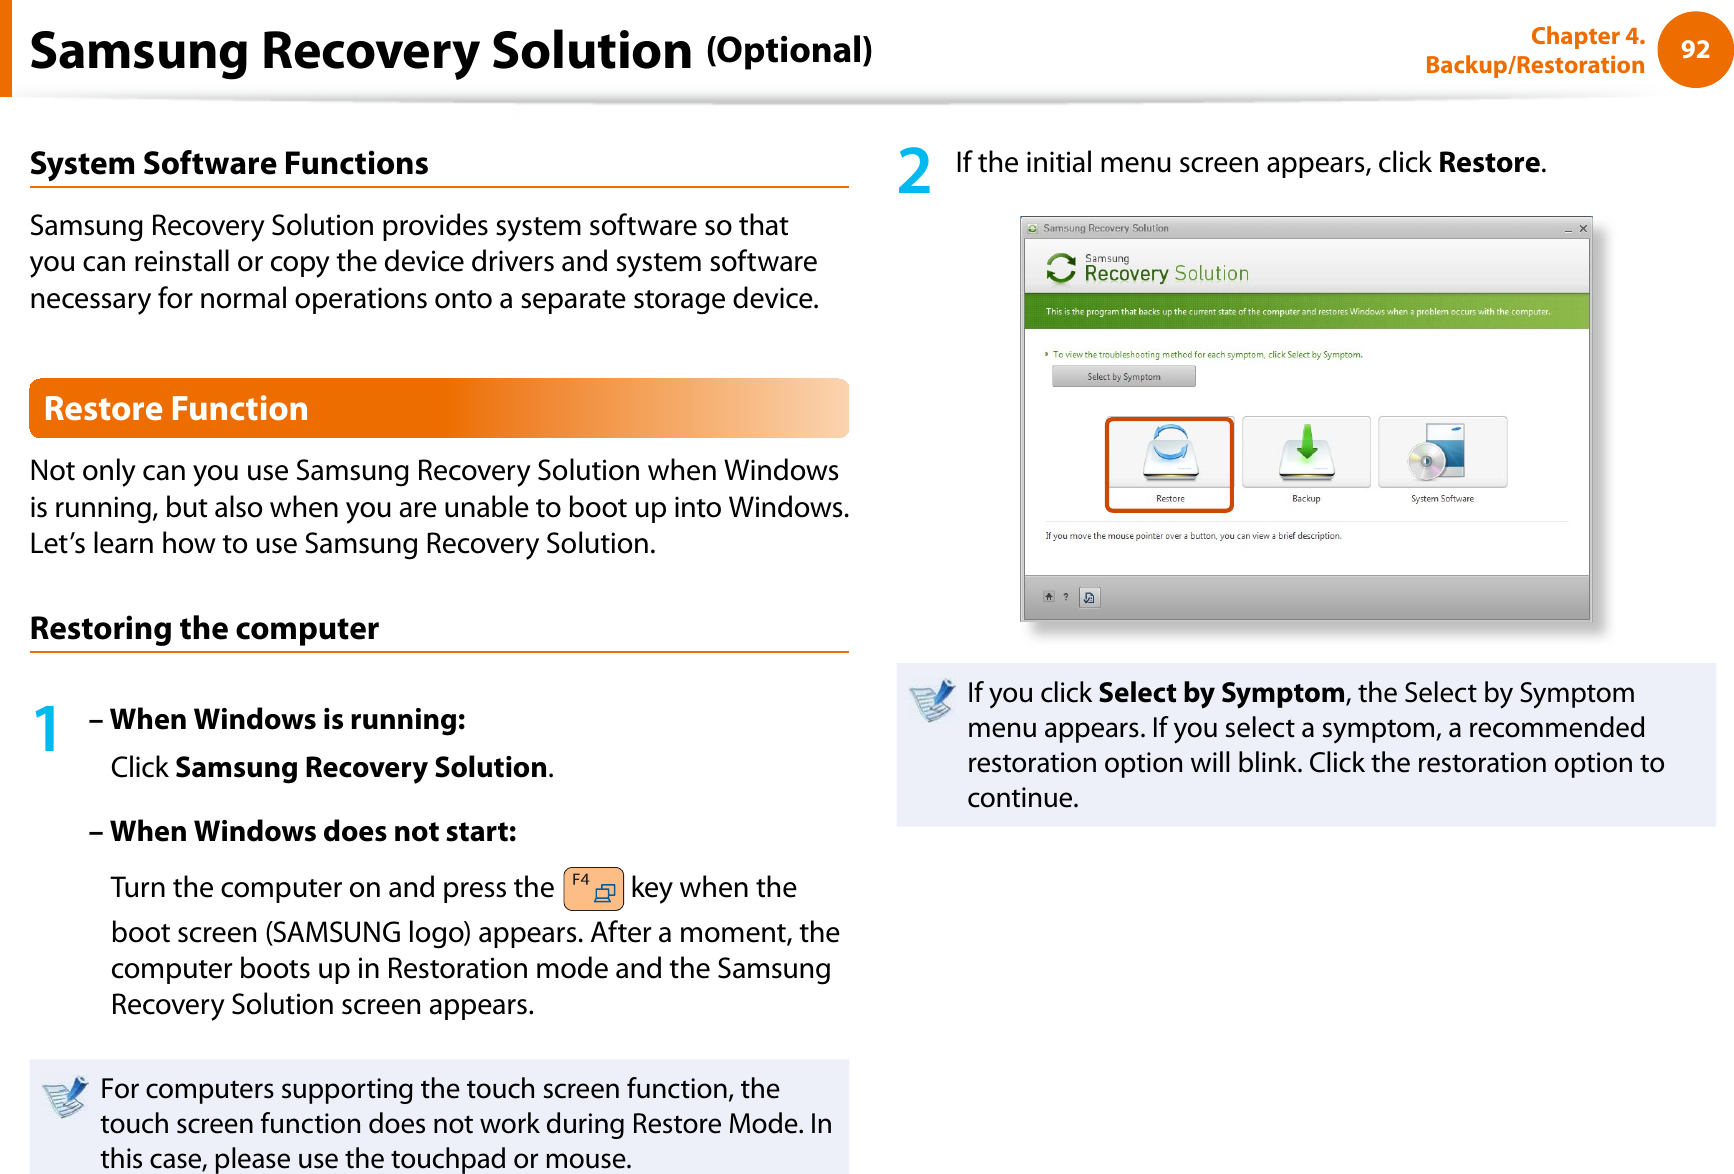 92Chapter 4. Backup/RestorationSystem Software FunctionsSamsung Recovery Solution provides system software so that you can reinstall or copy the device drivers and system software necessary for normal operations onto a separate storage device.Restore FunctionNot only can you use Samsung Recovery Solution when Windows is running, but also when you are unable to boot up into Windows. Let’s learn how to use Samsung Recovery Solution.Restoring the computer1– When Windows is running:Click Samsung Recovery Solution.– When Windows does not start:Turn the computer on and press the   key when the boot screen (SAMSUNG logo) appears. After a moment, the computer boots up in Restoration mode and the Samsung Recovery Solution screen appears.For computers supporting the touch screen function, the touch screen function does not work during Restore Mode. In this case, please use the touchpad or mouse.2If the initial menu screen appears, click Restore.If you click Select by Symptom, the Select by Symptom menu appears. If you select a symptom, a recommended restoration option will blink. Click the restoration option to continue.Samsung Recovery Solution (Optional)